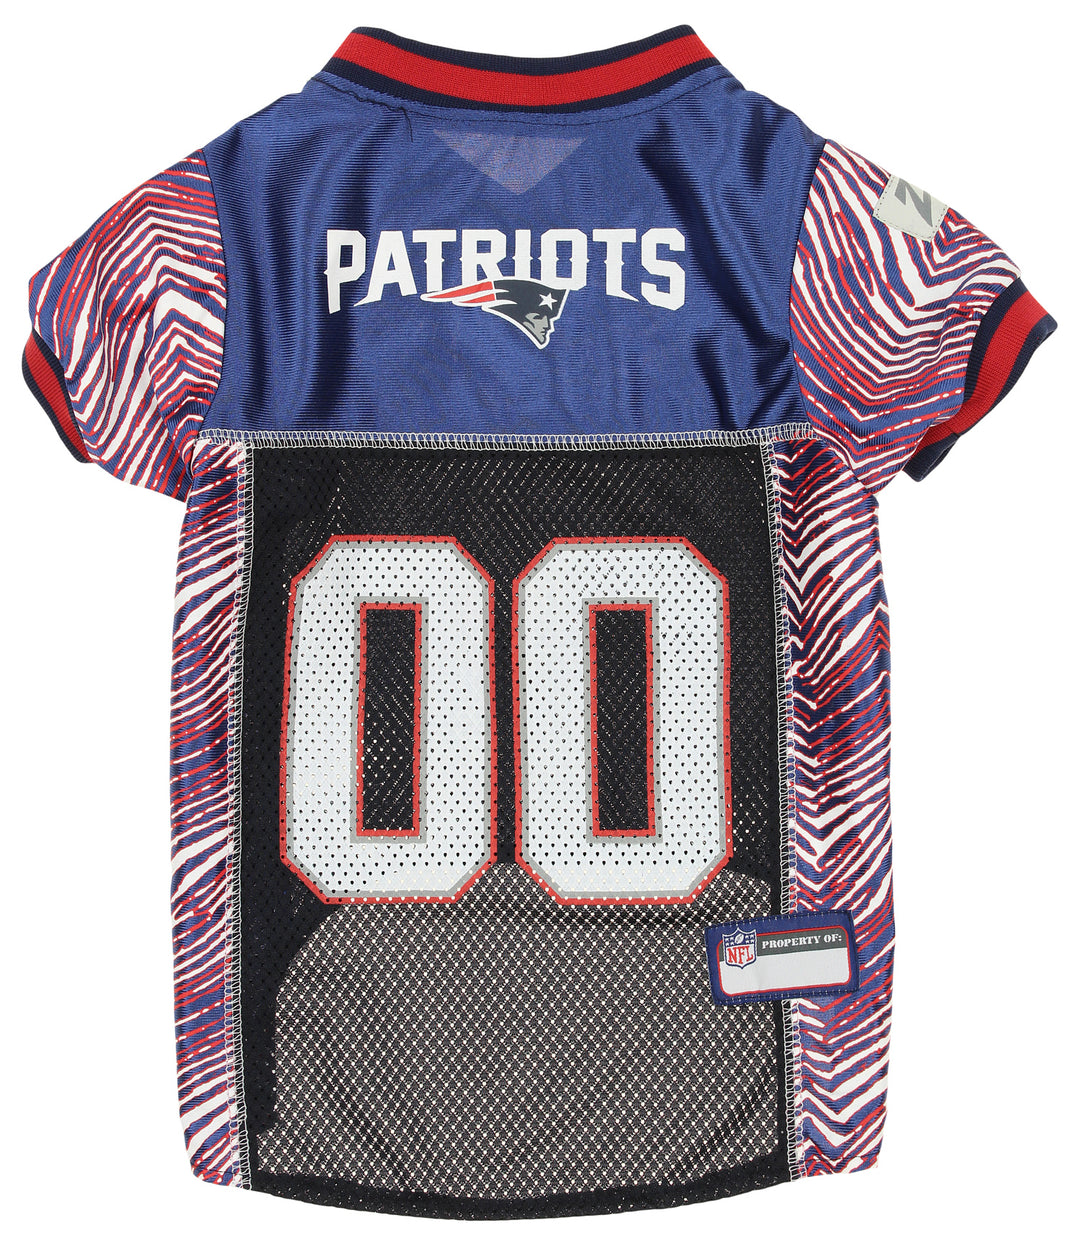 Zubaz X Pets First NFL New England Patriots Jersey For Dogs & Cats